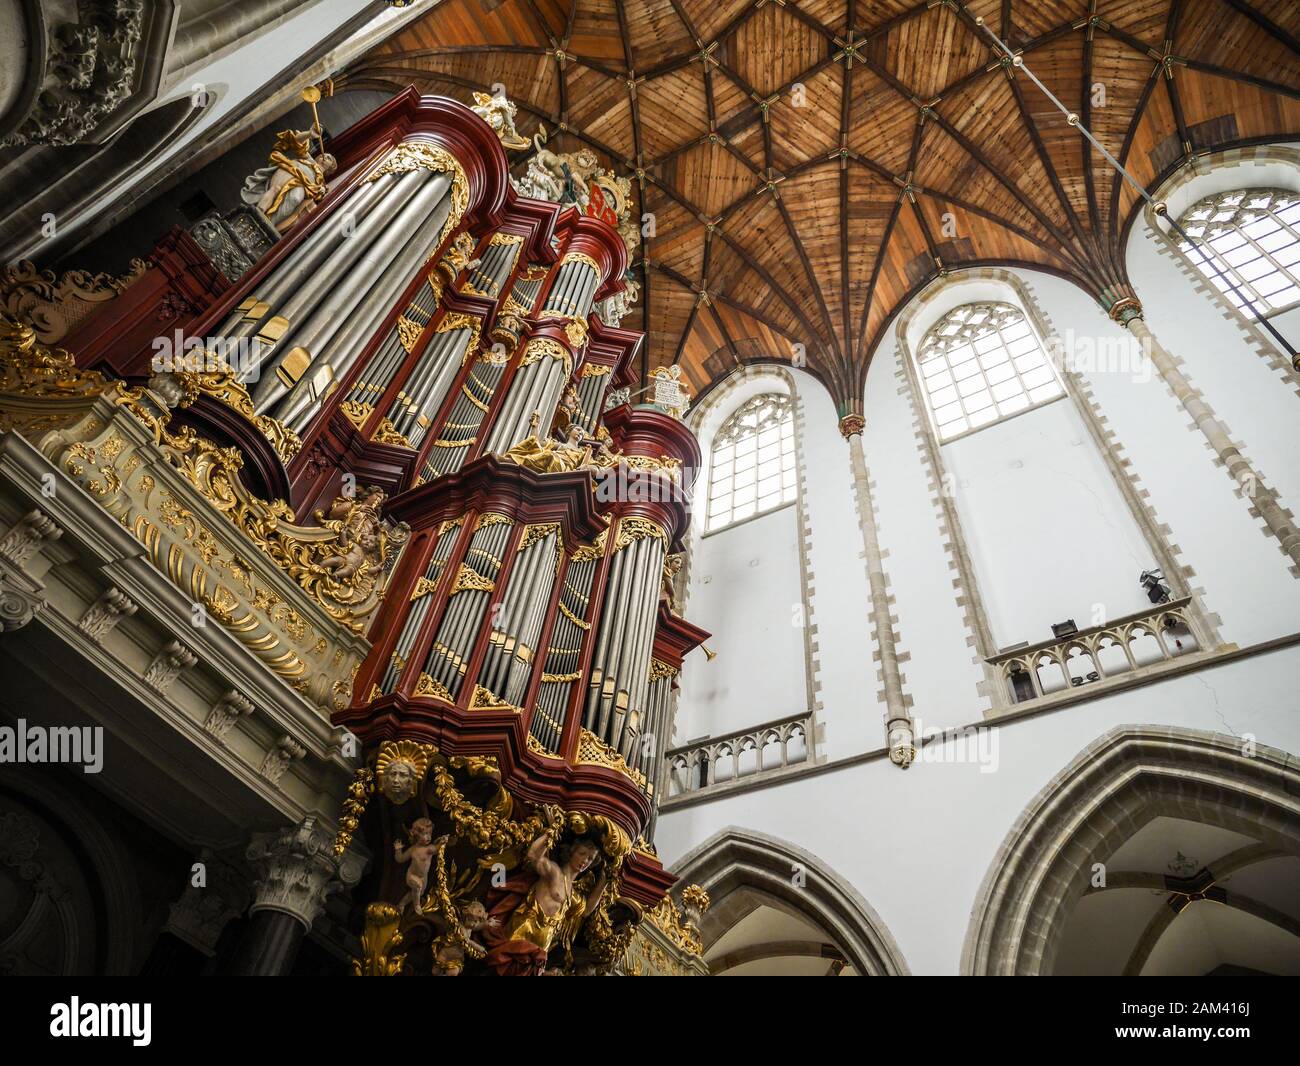 Cathedral of St.Bavo interior. Low angle view of the organ of the Grote Kerk (Great Church) in Haarlem, Netherlands. Stock Photo